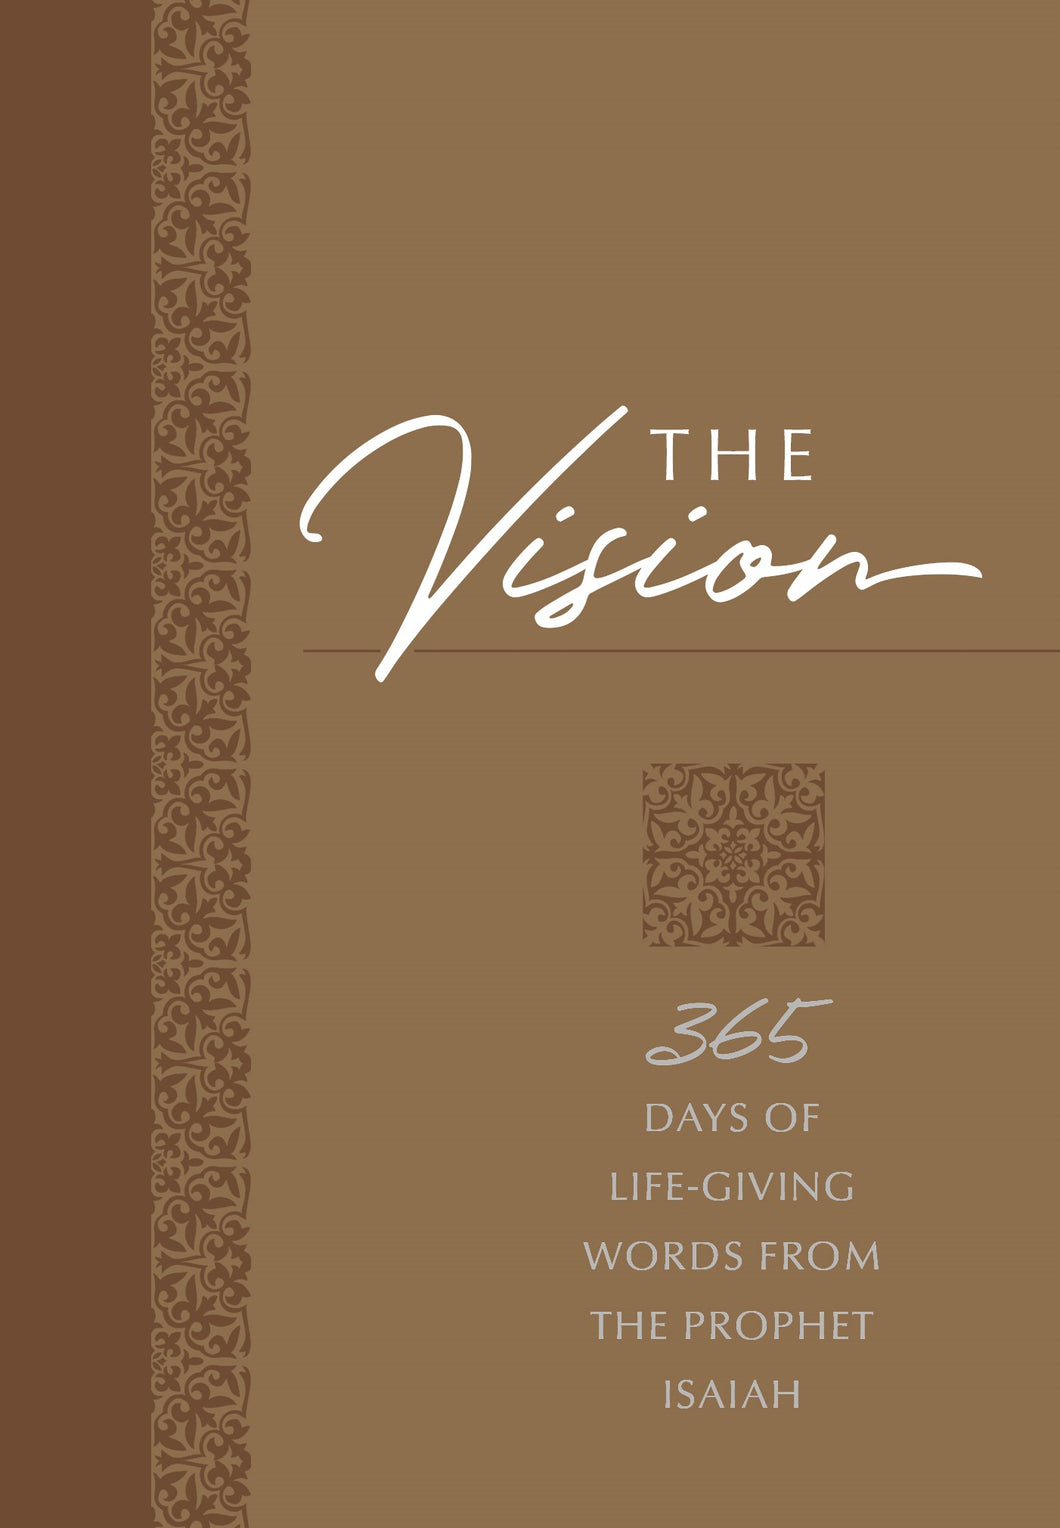 The Vision: 365 Days Of Life-Giving Words From The Prophet Isaiah (TPT)